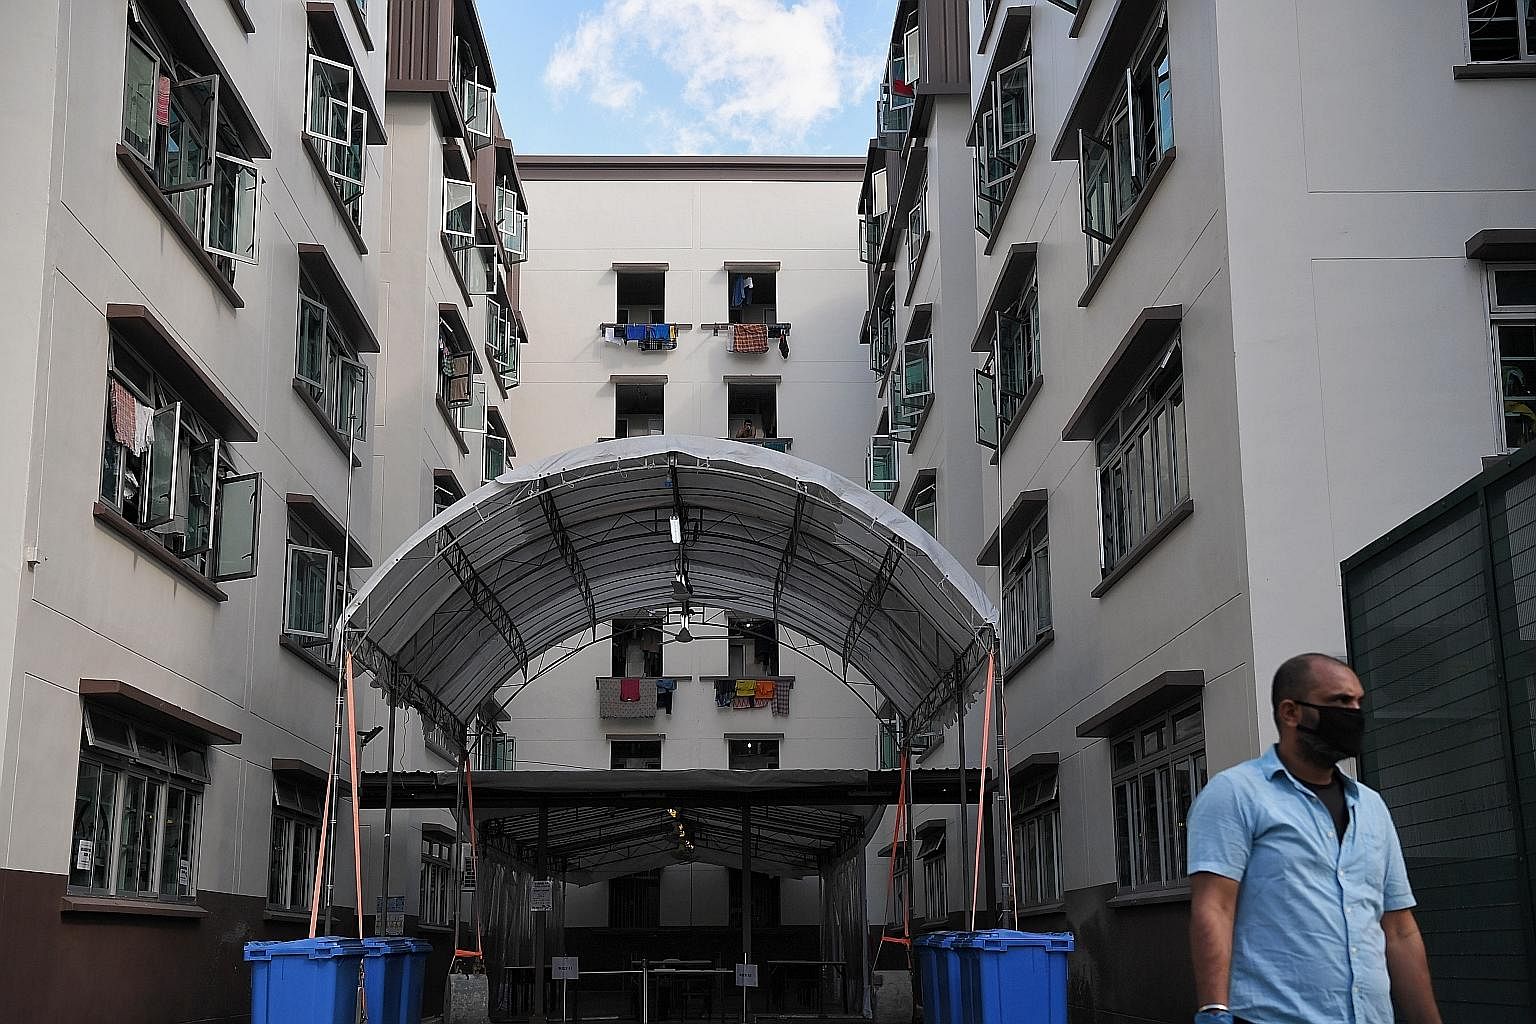 As of yesterday afternoon, Singapore had 305 new Covid-19 cases, most of whom are work permit holders living in foreign worker dormitories. ST PHOTO: KUA CHEE SIONG